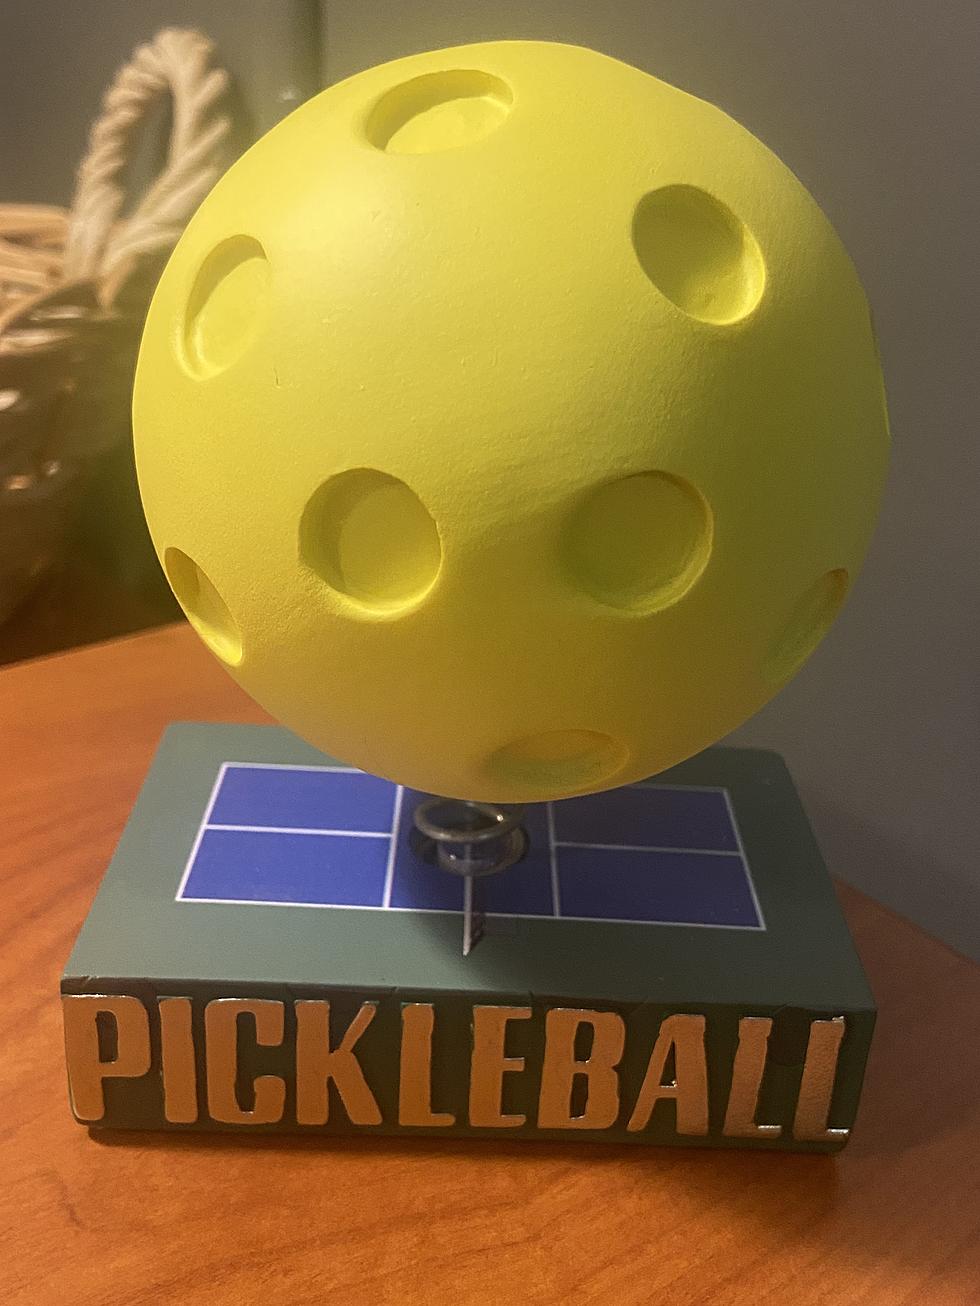 August 8th &#8211; National Pickleball Day